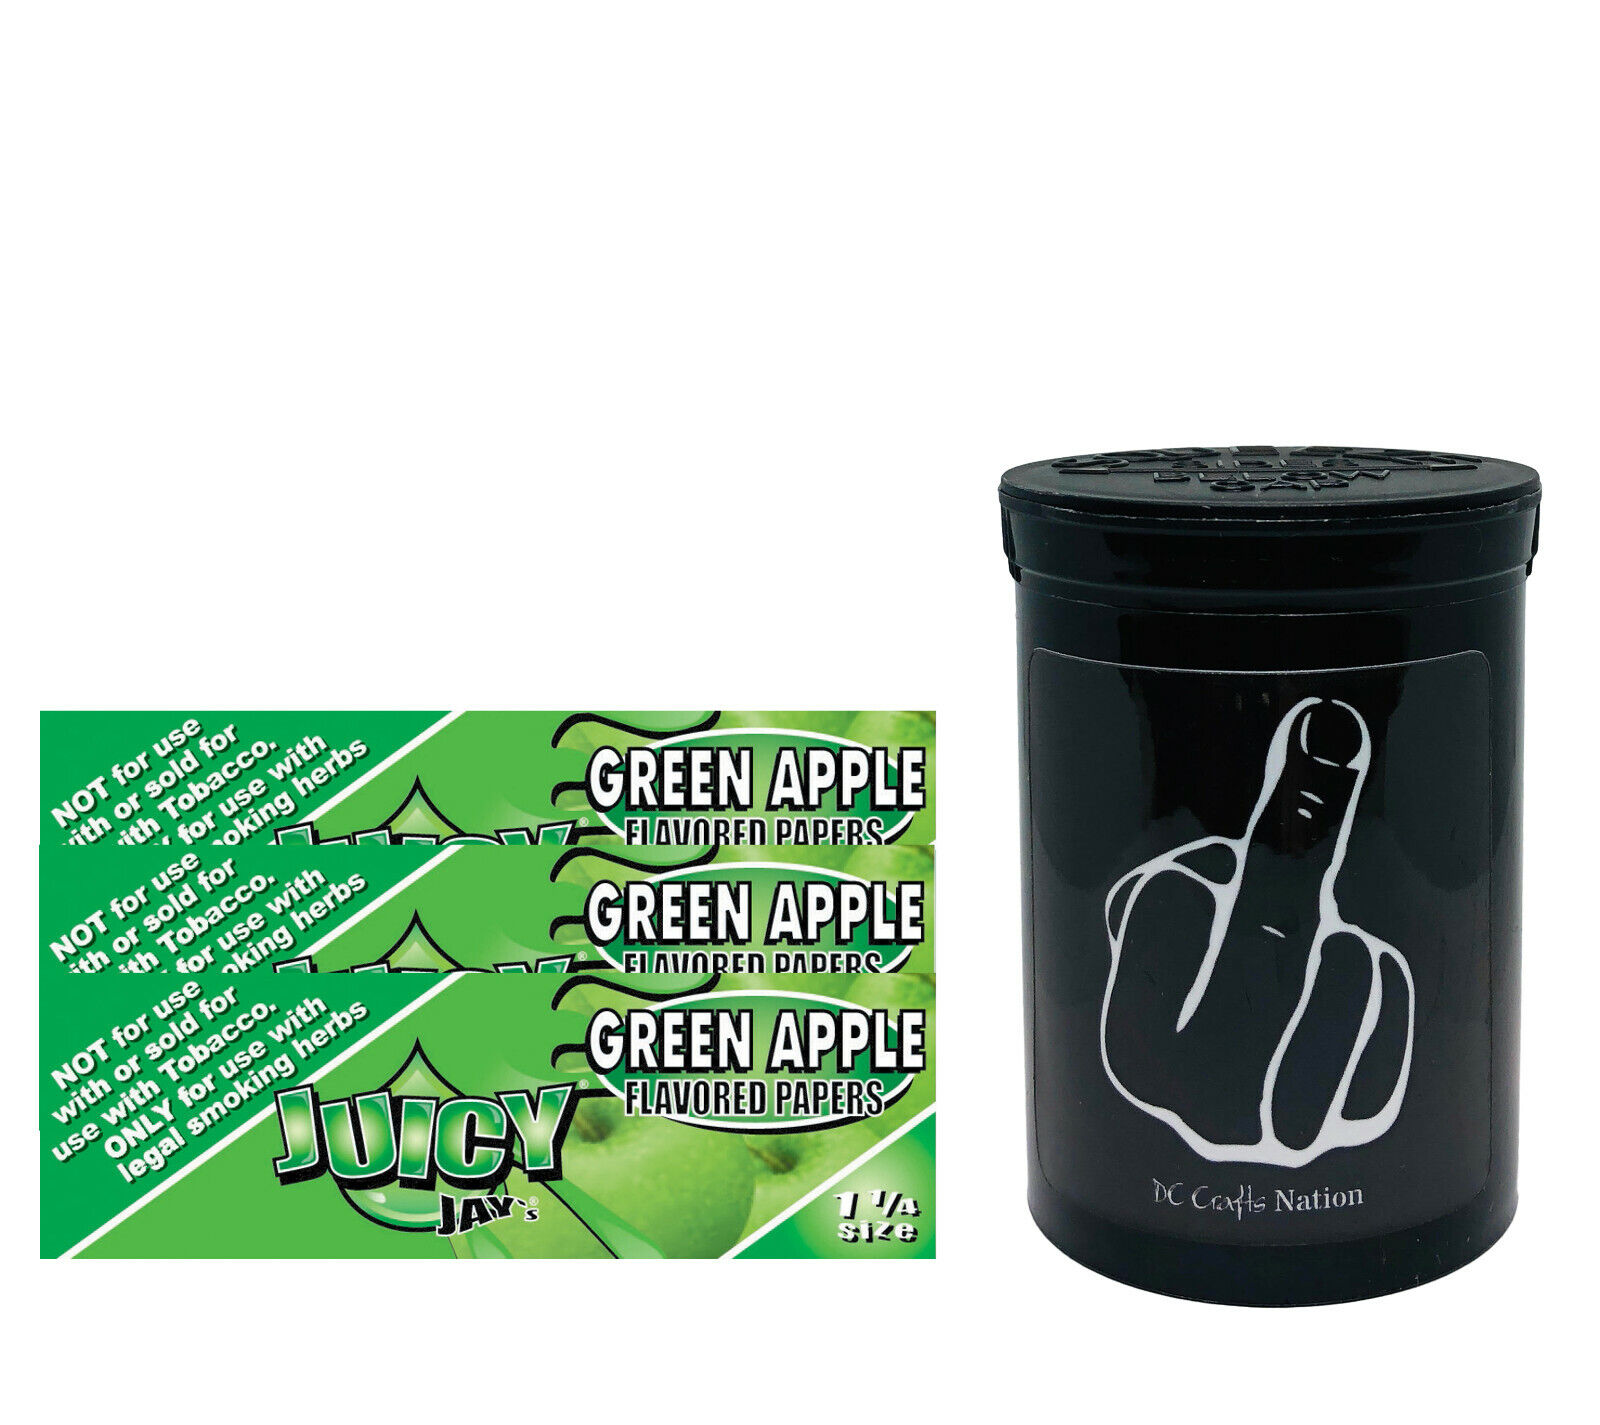 Juicy Jay's Green Apple Papers 1.25 3 Packs & Child Resistant Fresh Kettle